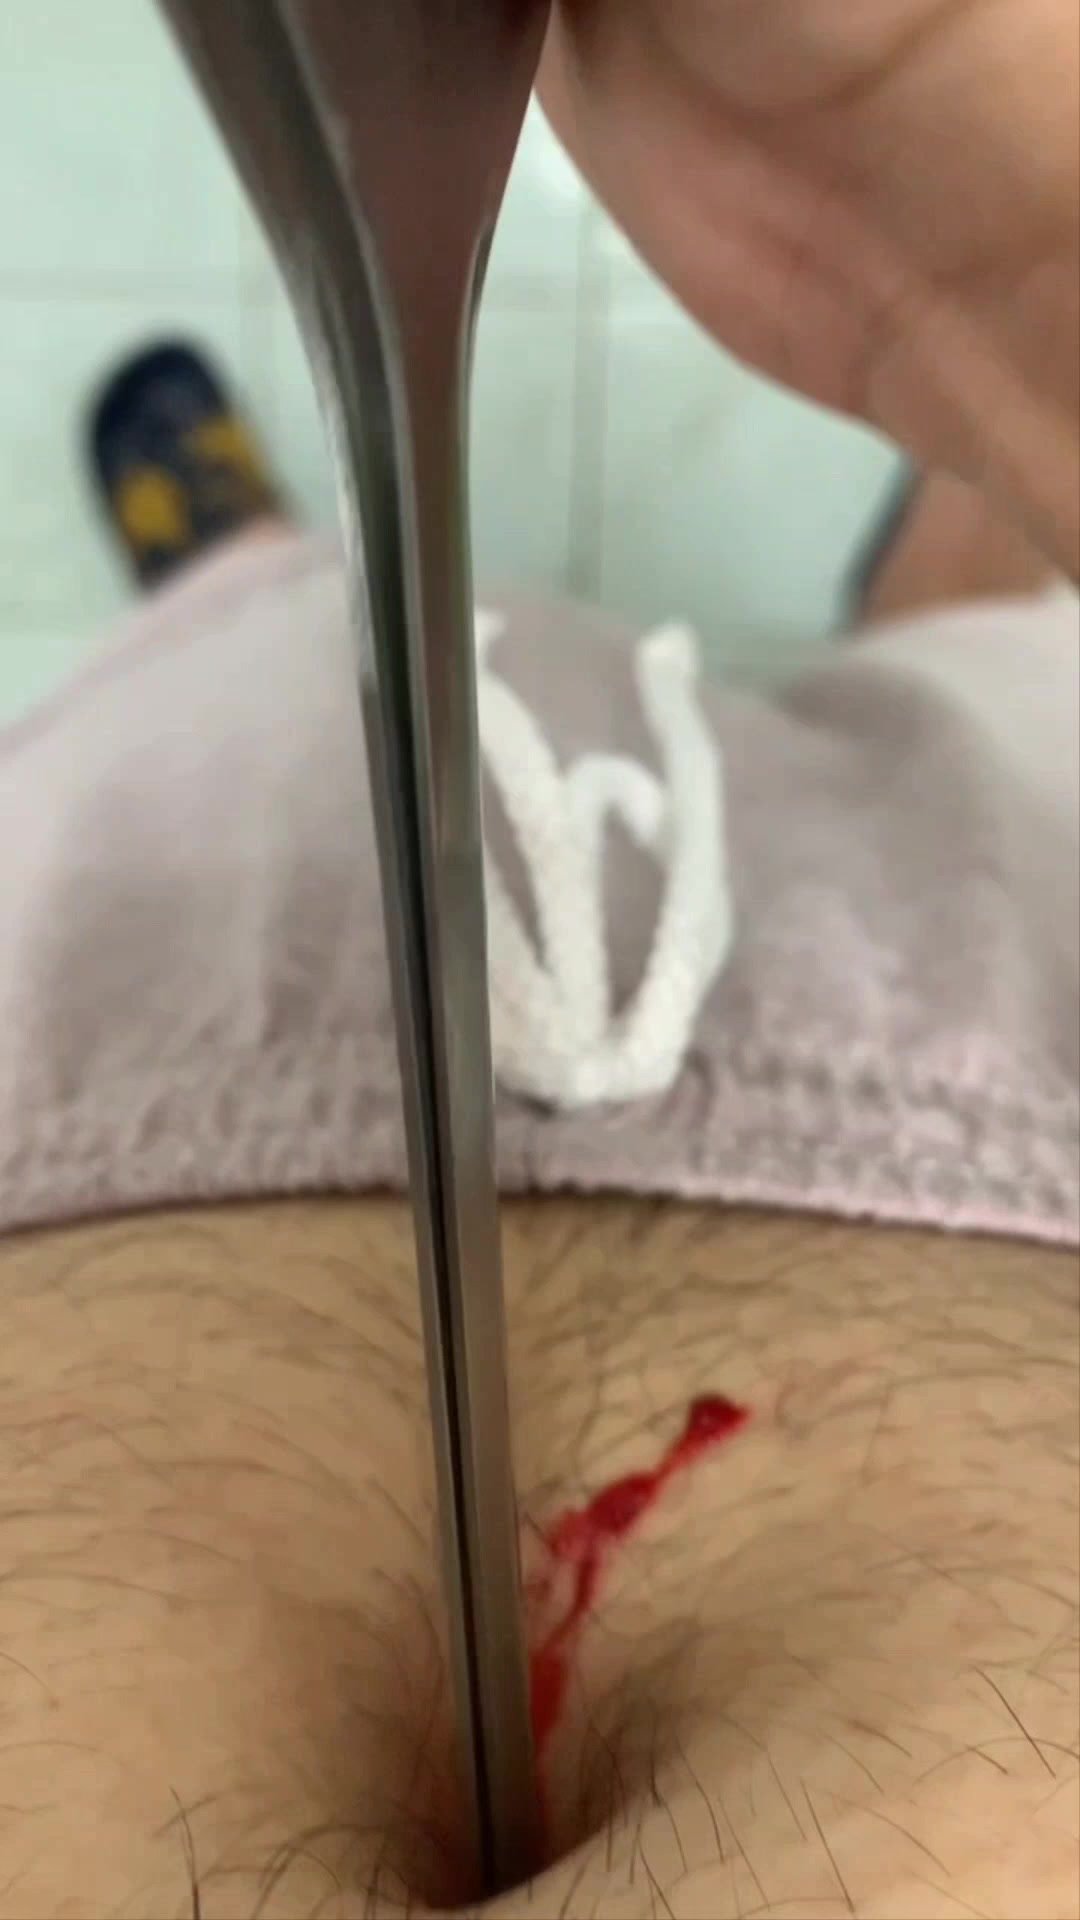 Clamp stabbed into navel deeply